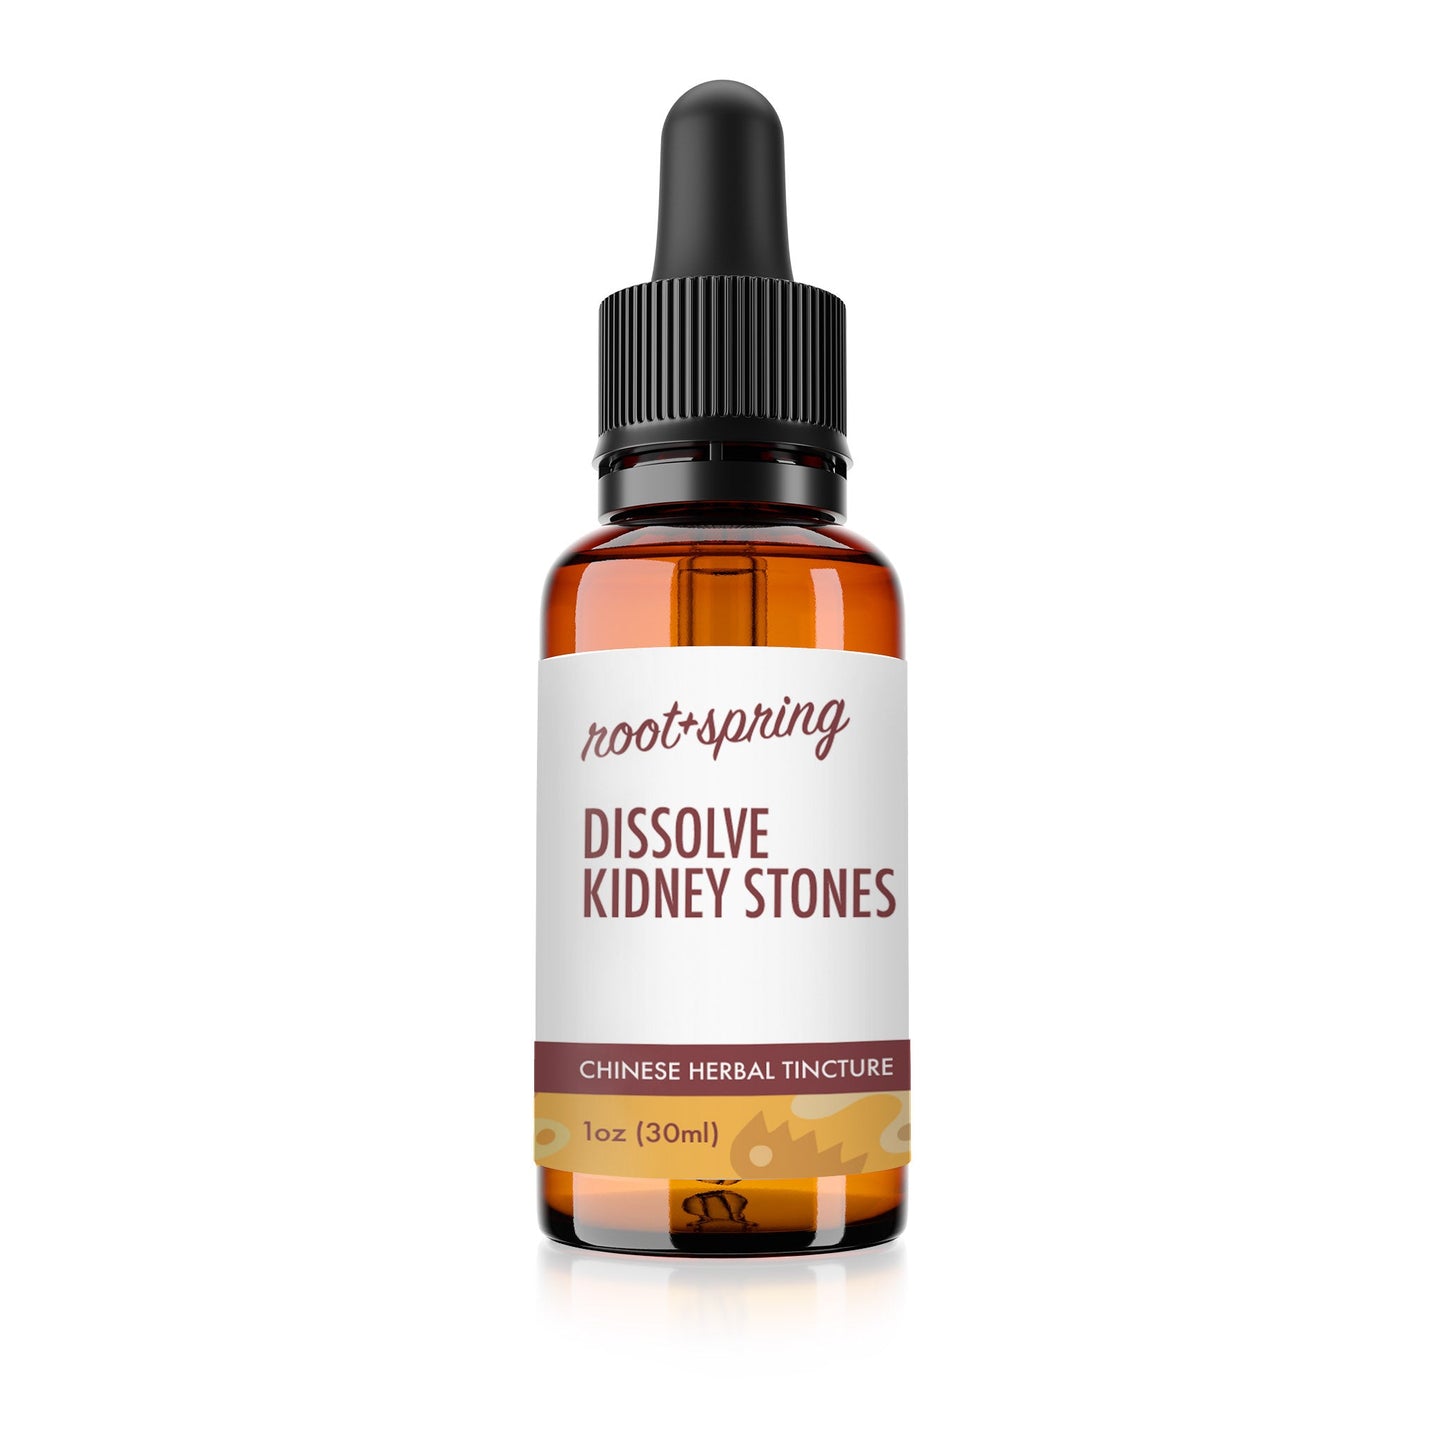 Bottle of Dissolve Kidney Stones Herbal Tincture by root + spring.